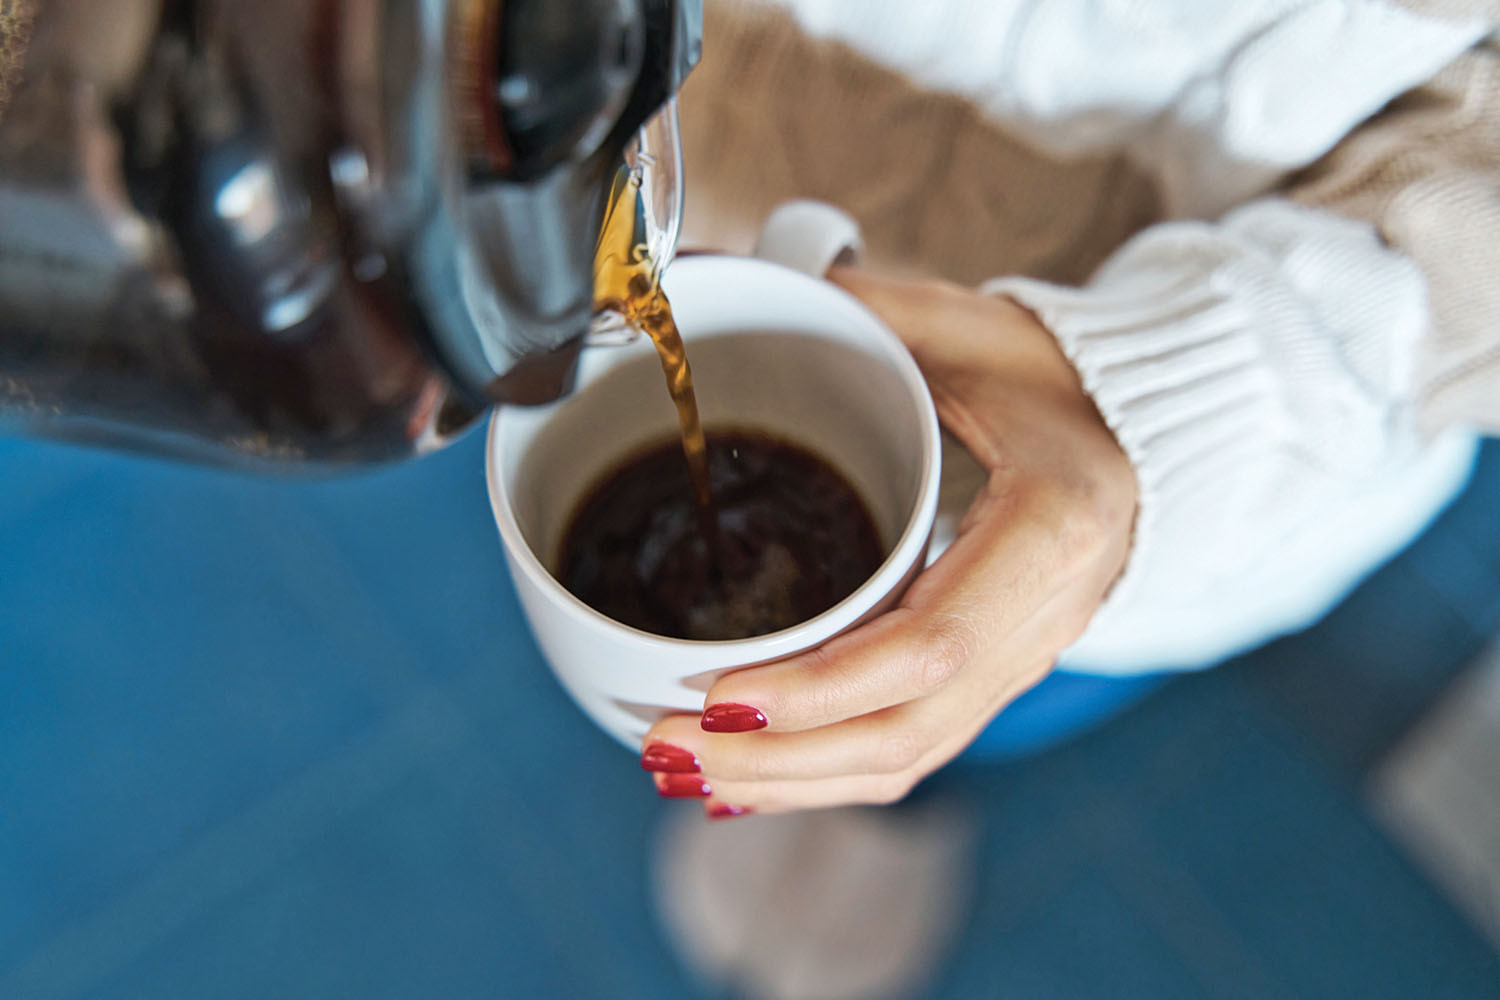 cropped photo of the hands of a woman holding a cup in her left hand and pouring coffee into it from a carafe